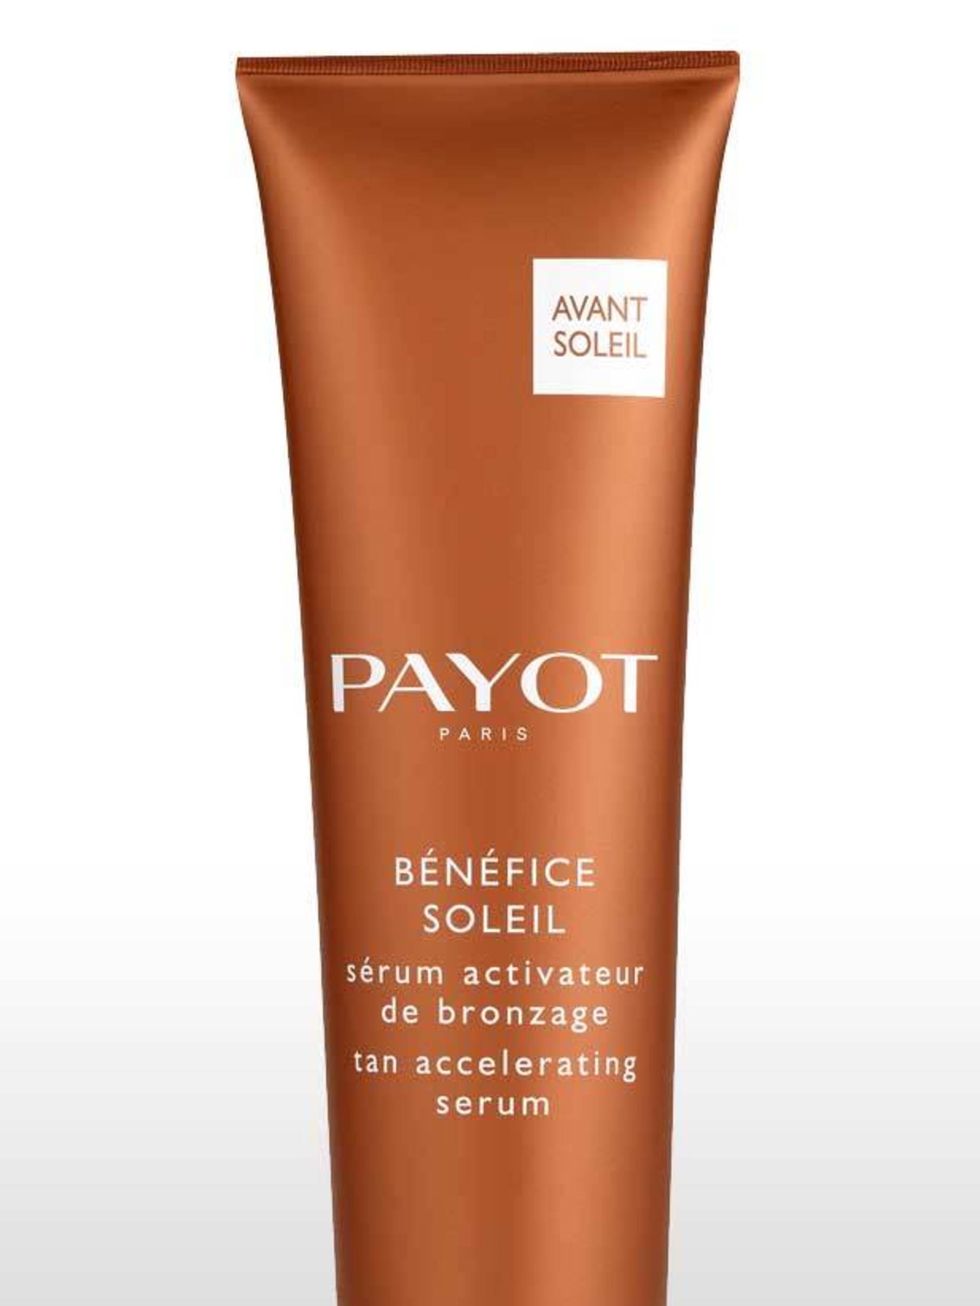 <p><strong>Two weeks to go</strong></p><p>This a godsend for paler skintypes who dont go sunkissed with quite as much ease. Payot's serum stimulates melanin production that turns you brown. Apply daily two weeks before sun exposure, Dr Payots tan accele